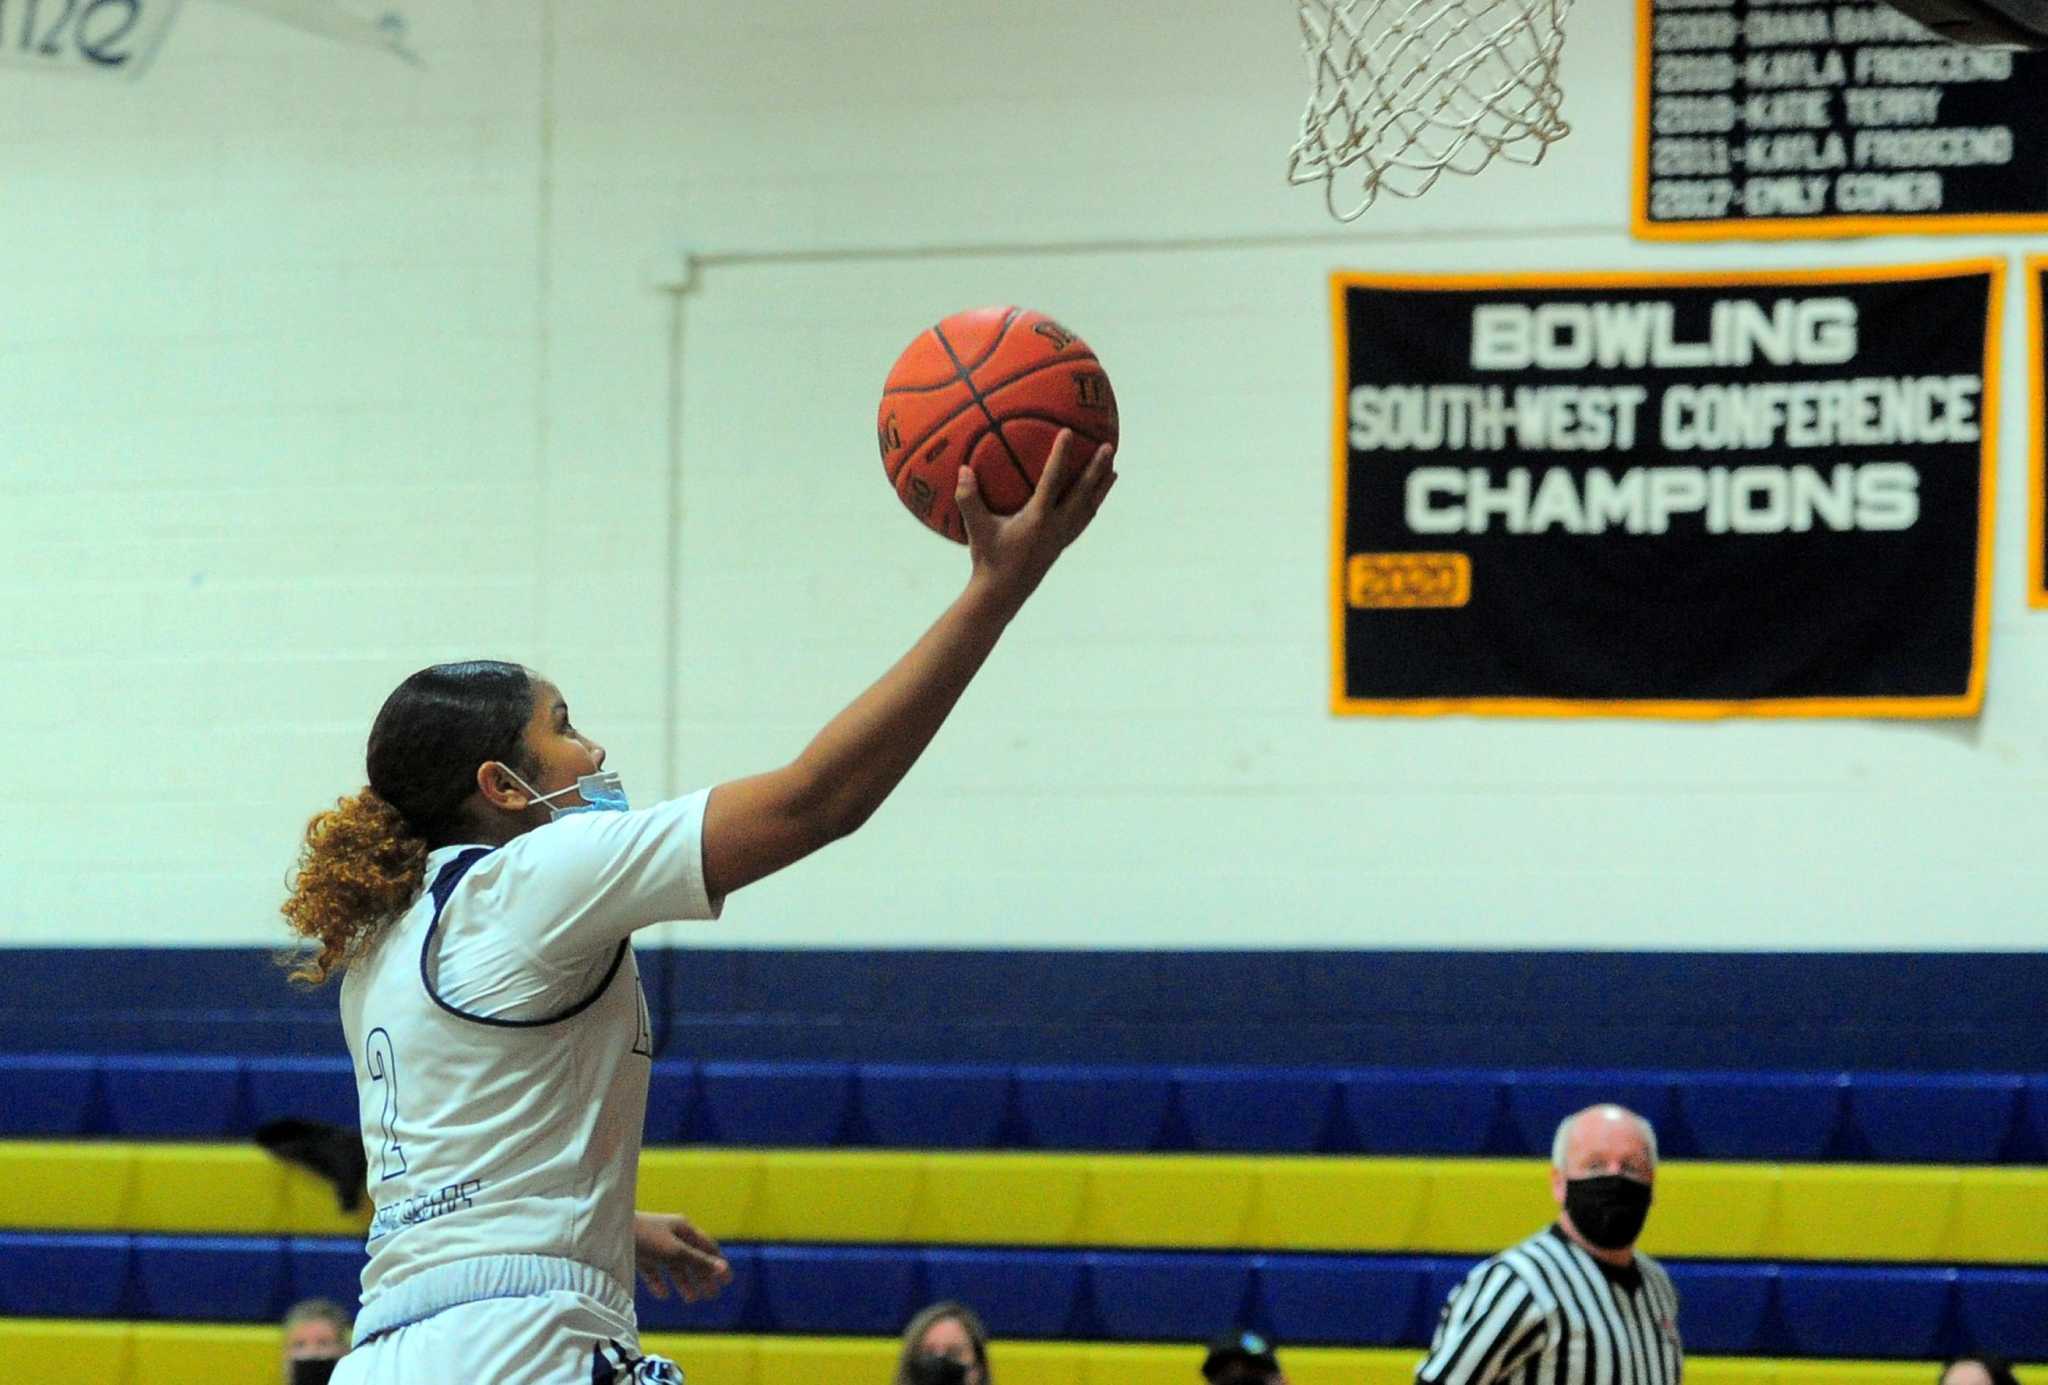 Notre Dame’s Aizhanique Mayo to play basketball at Marquette